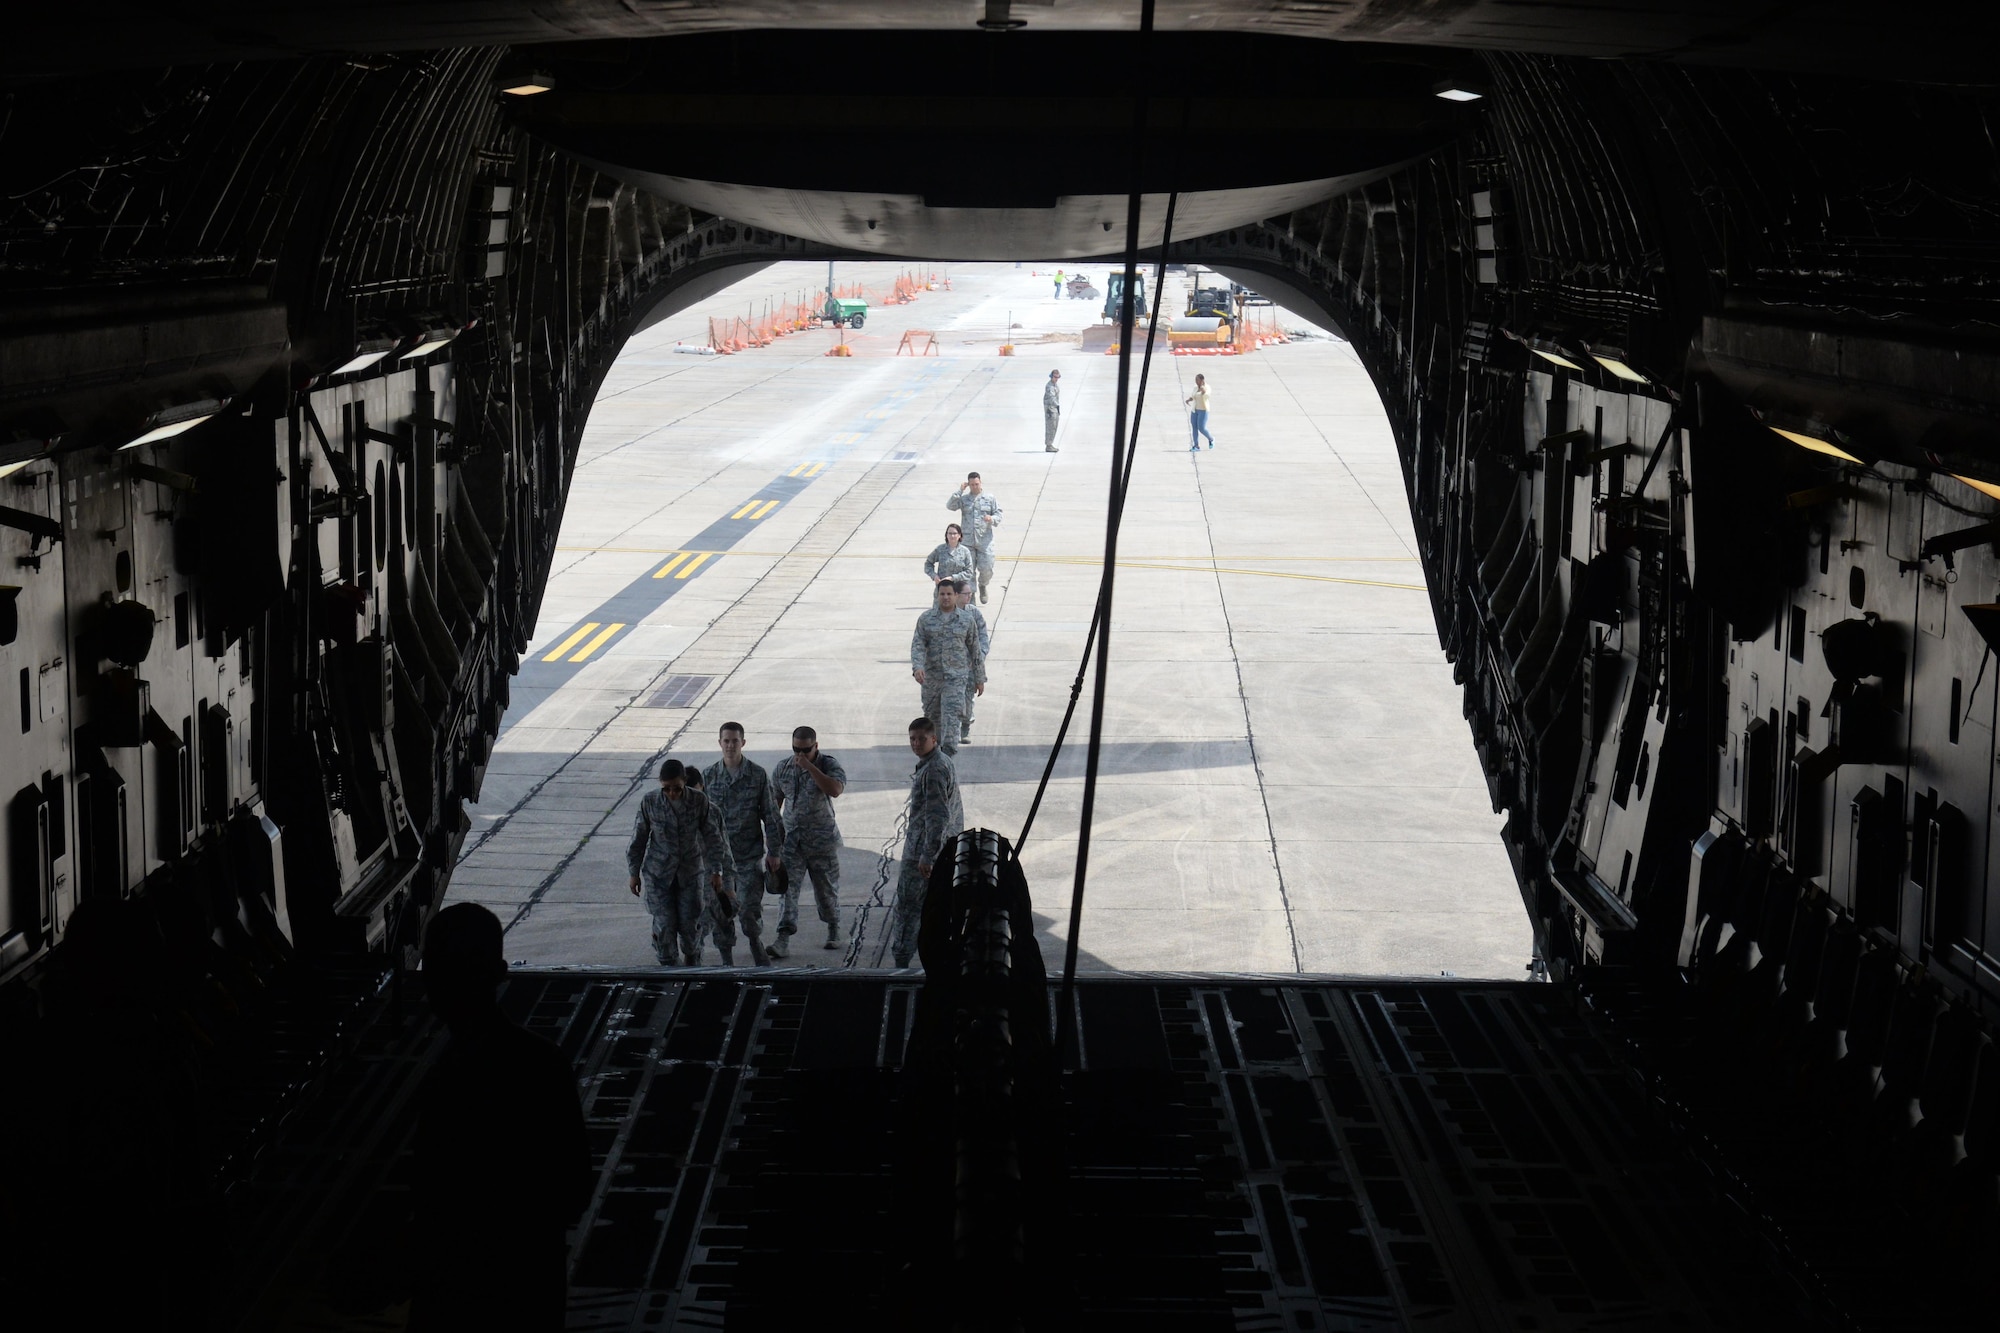 Members of Keesler Air Force Base board a C-17 Globemaster III for an incentive flight Aug. 4, 2016, at Keesler AFB, Miss. The incentive flight was part list of a weeklong hurricane exercise to prepare Keesler for the current hurricane season.  (Air Force Photo by Airman 1st Class Travis Beihl/Released)
